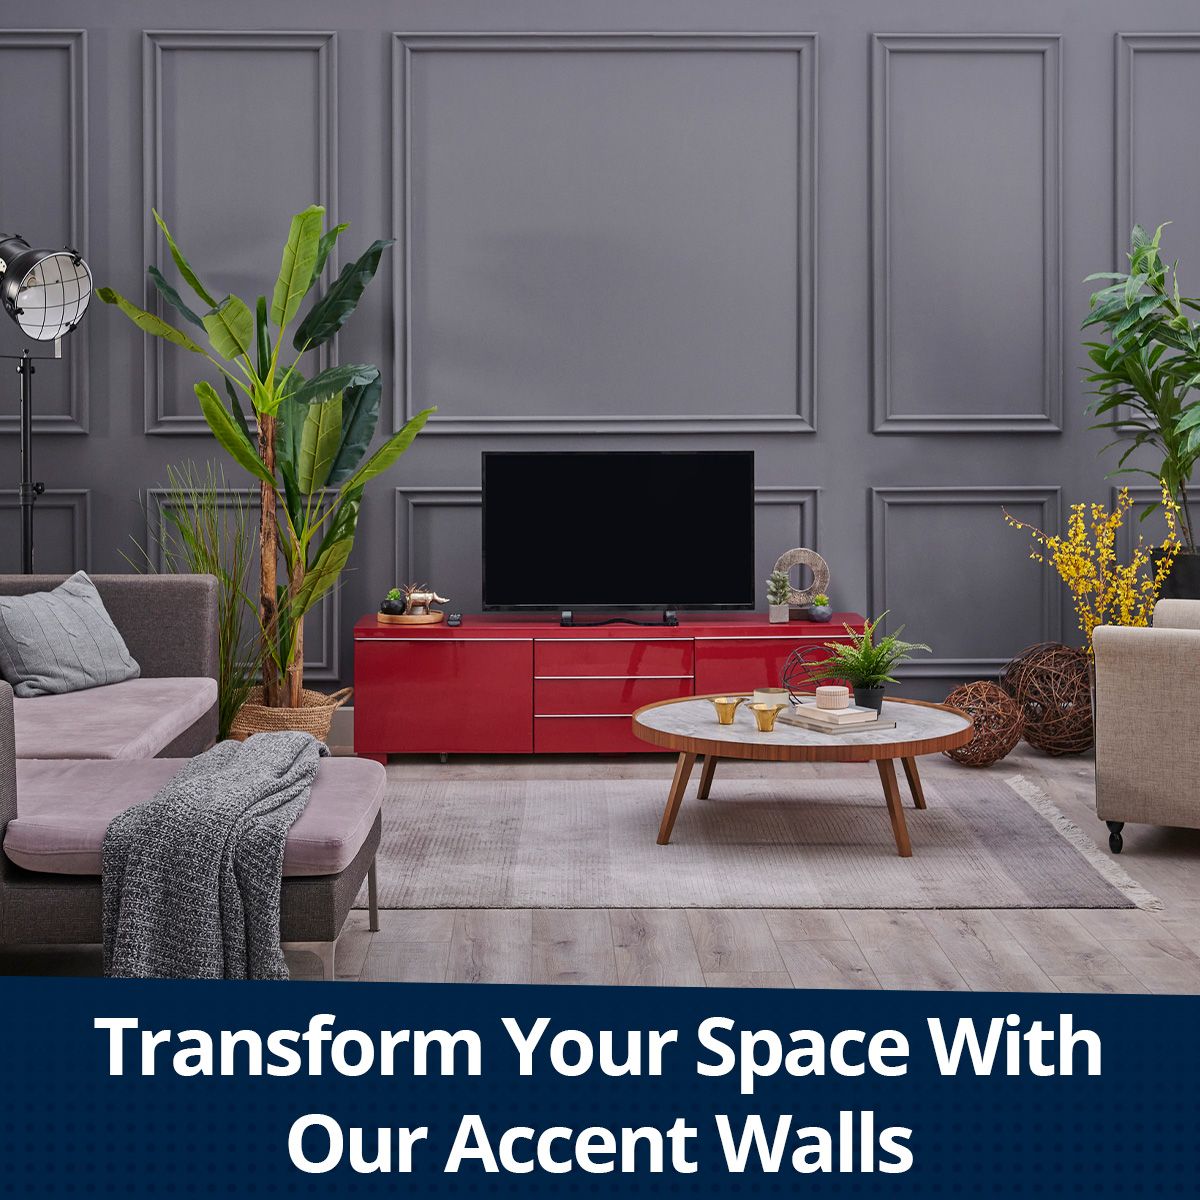 Transform Your Space With Our Accent Walls